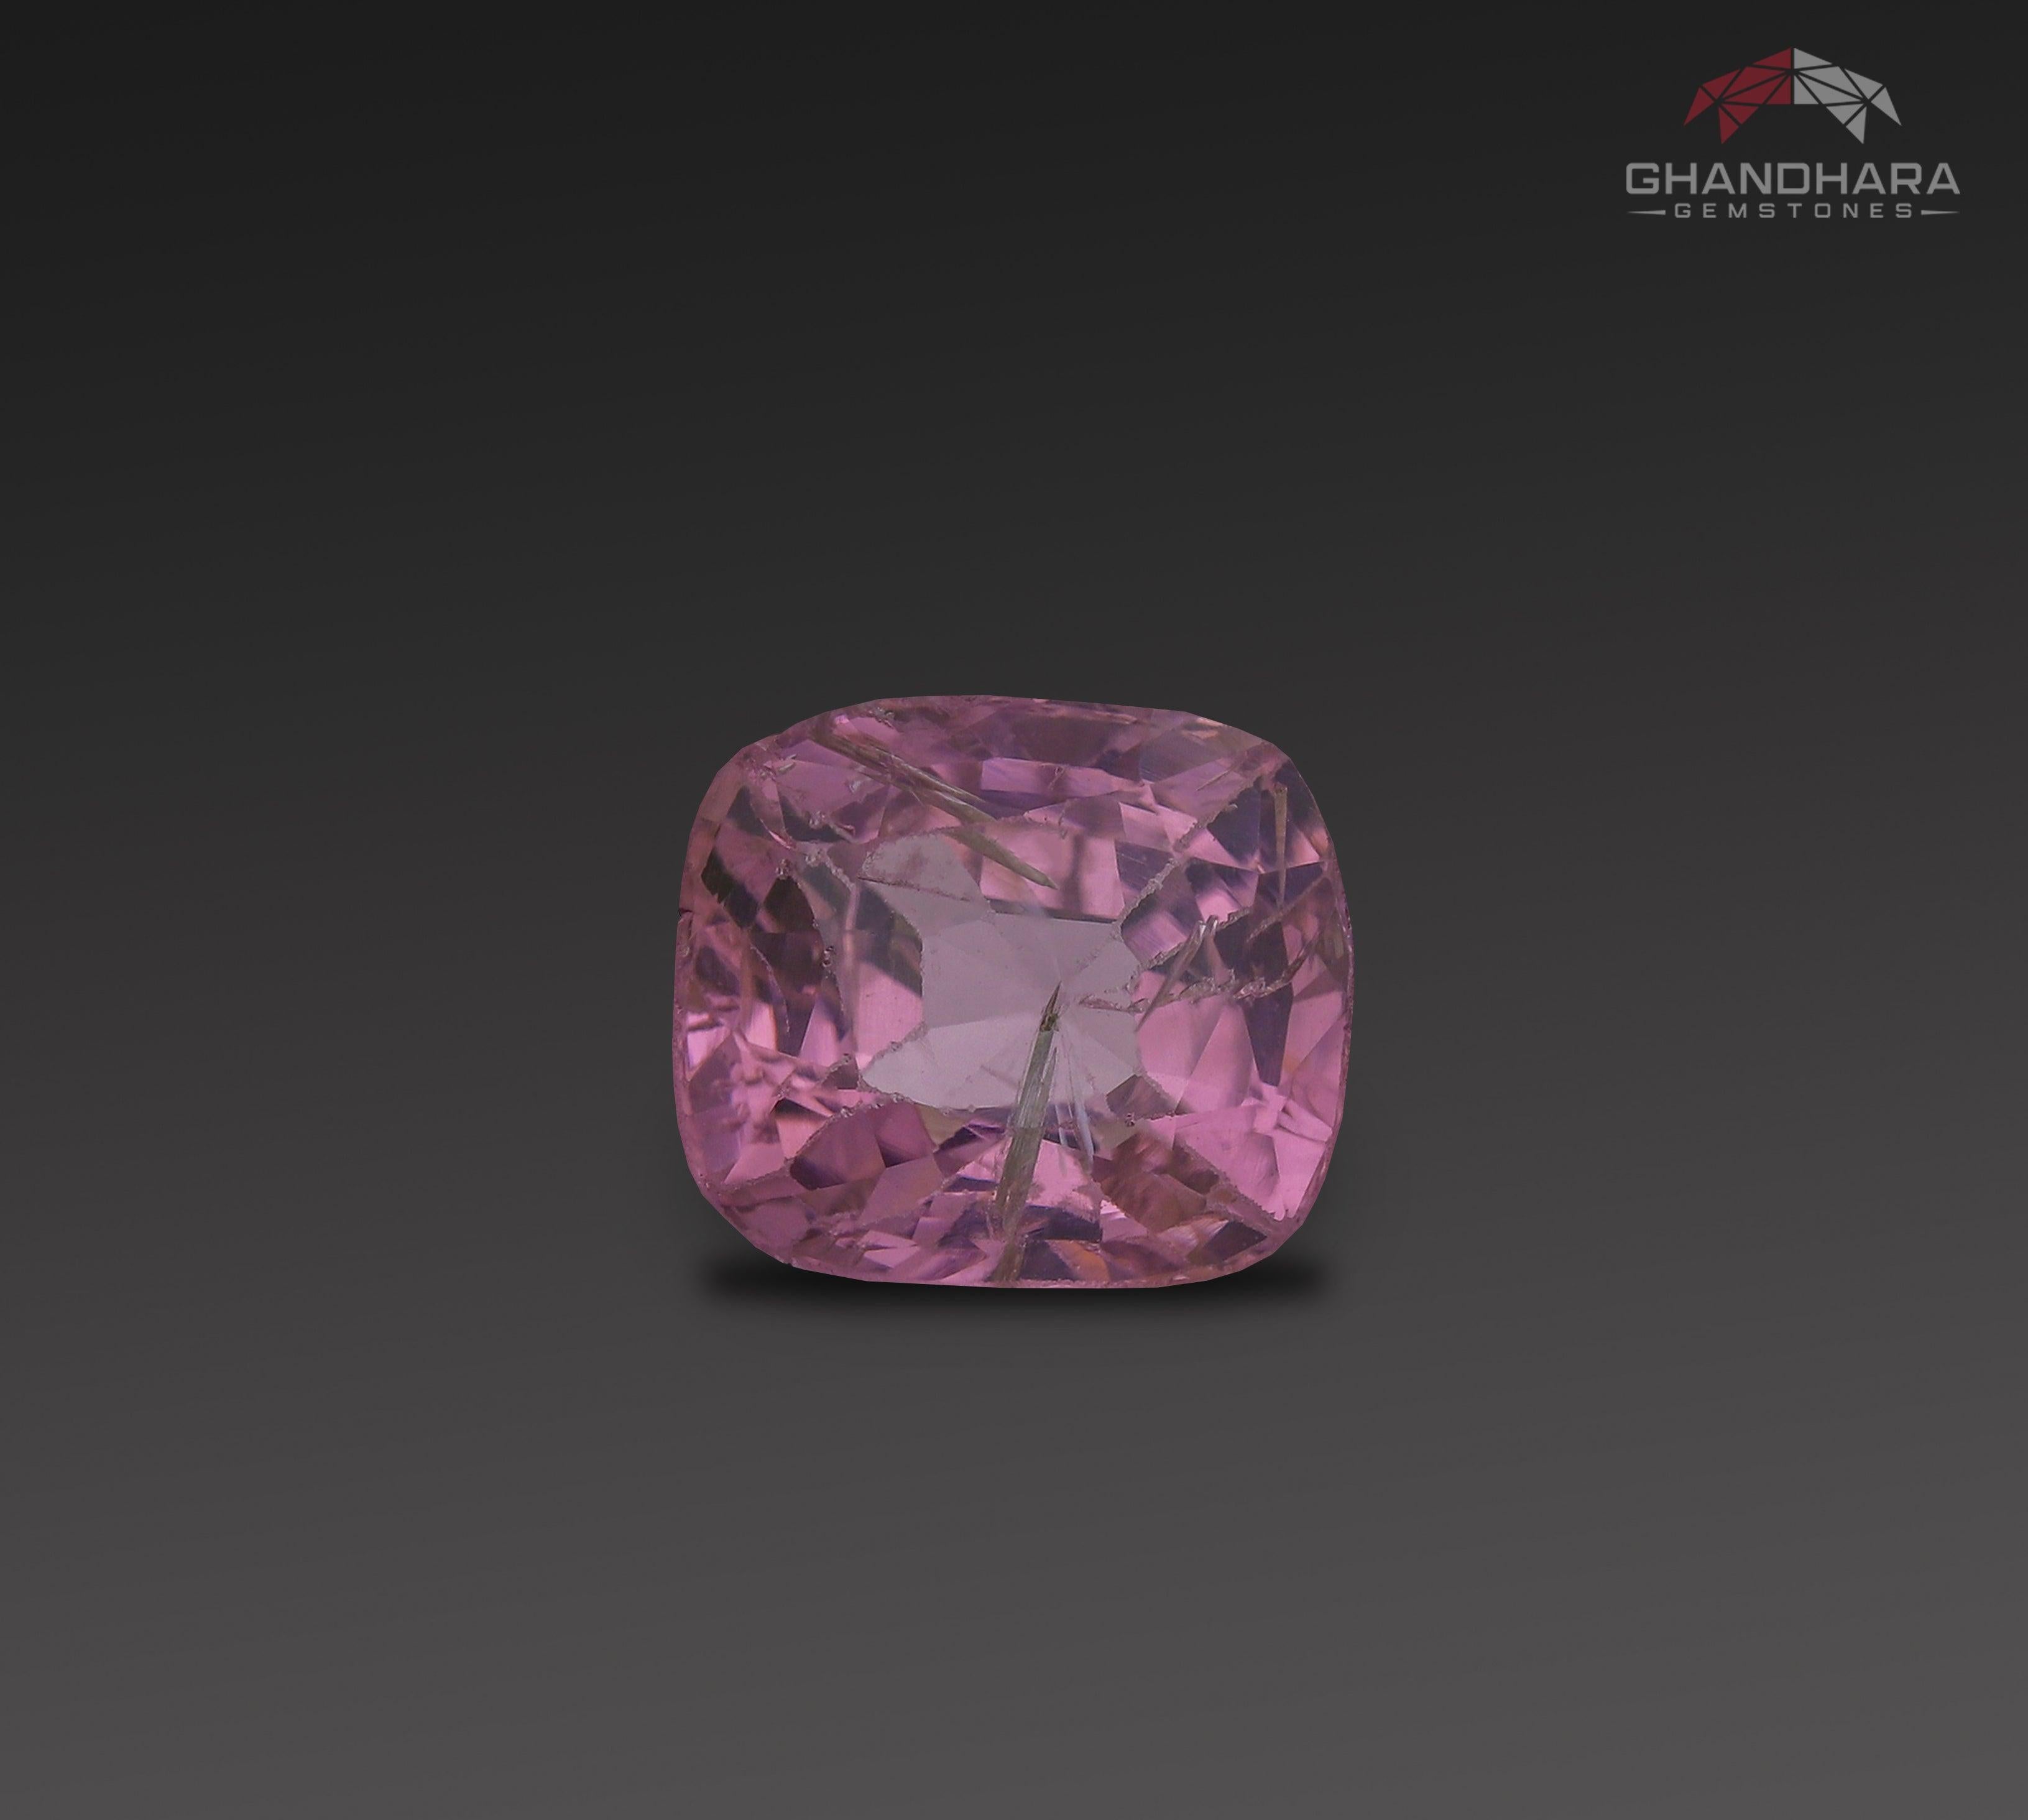 Purplish Pink Spinel From Burma of 1.26 carats from Burma has a wonderful cut in a Cushion shape, incredible pink colour. Great brilliance. This gem is Included.

Product Information:
GEMSTONE TYPE	Pinkish Purple Spinel From Burma
WEIGHT	1.26